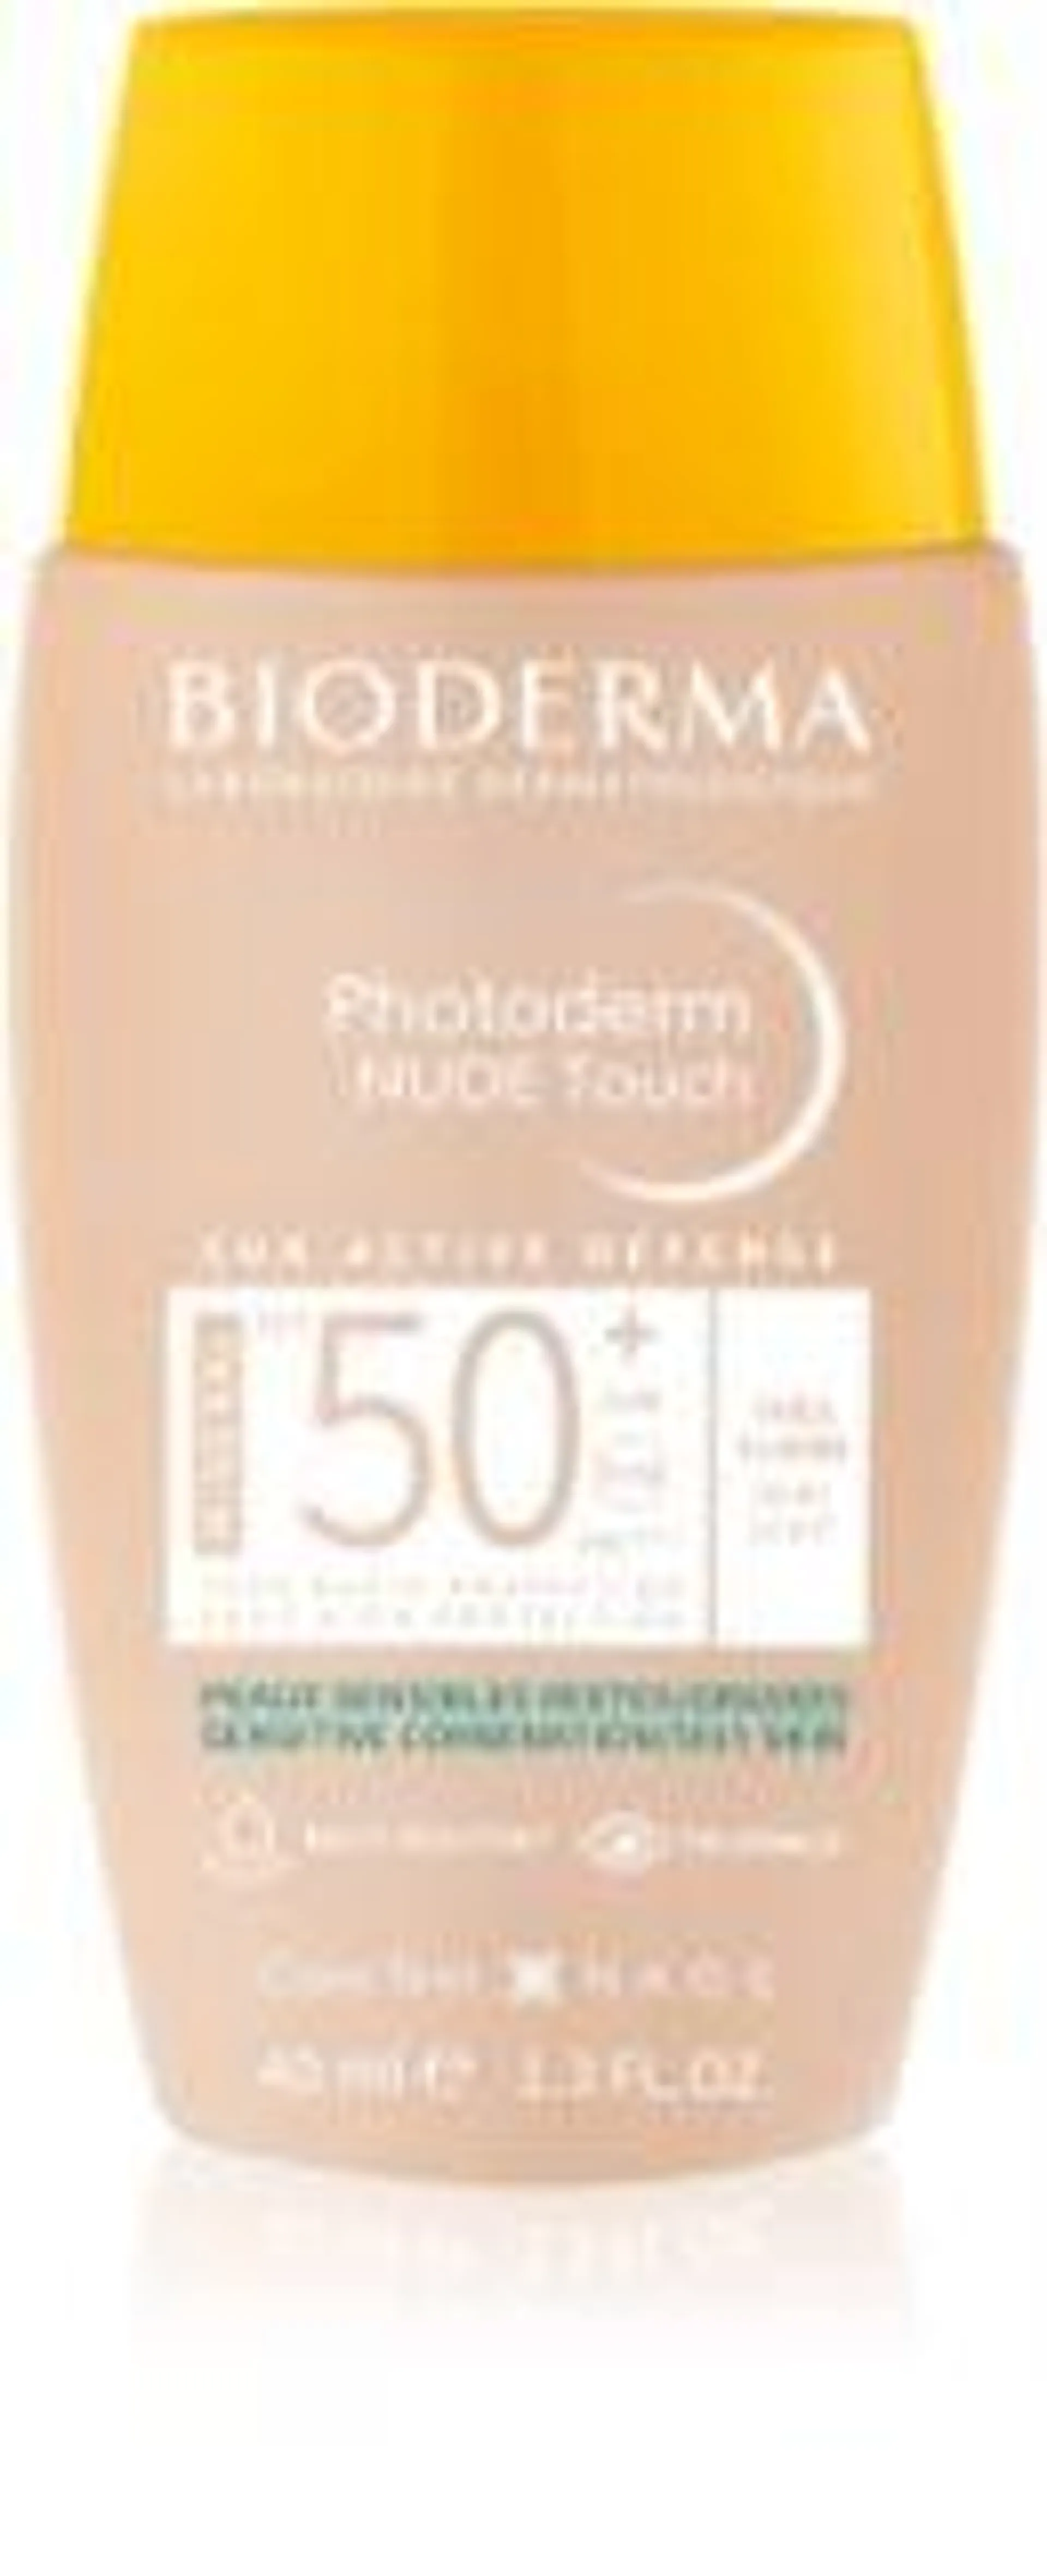 Mineral Sunscreen for Face SPF 50+ shade Very light 40 ml